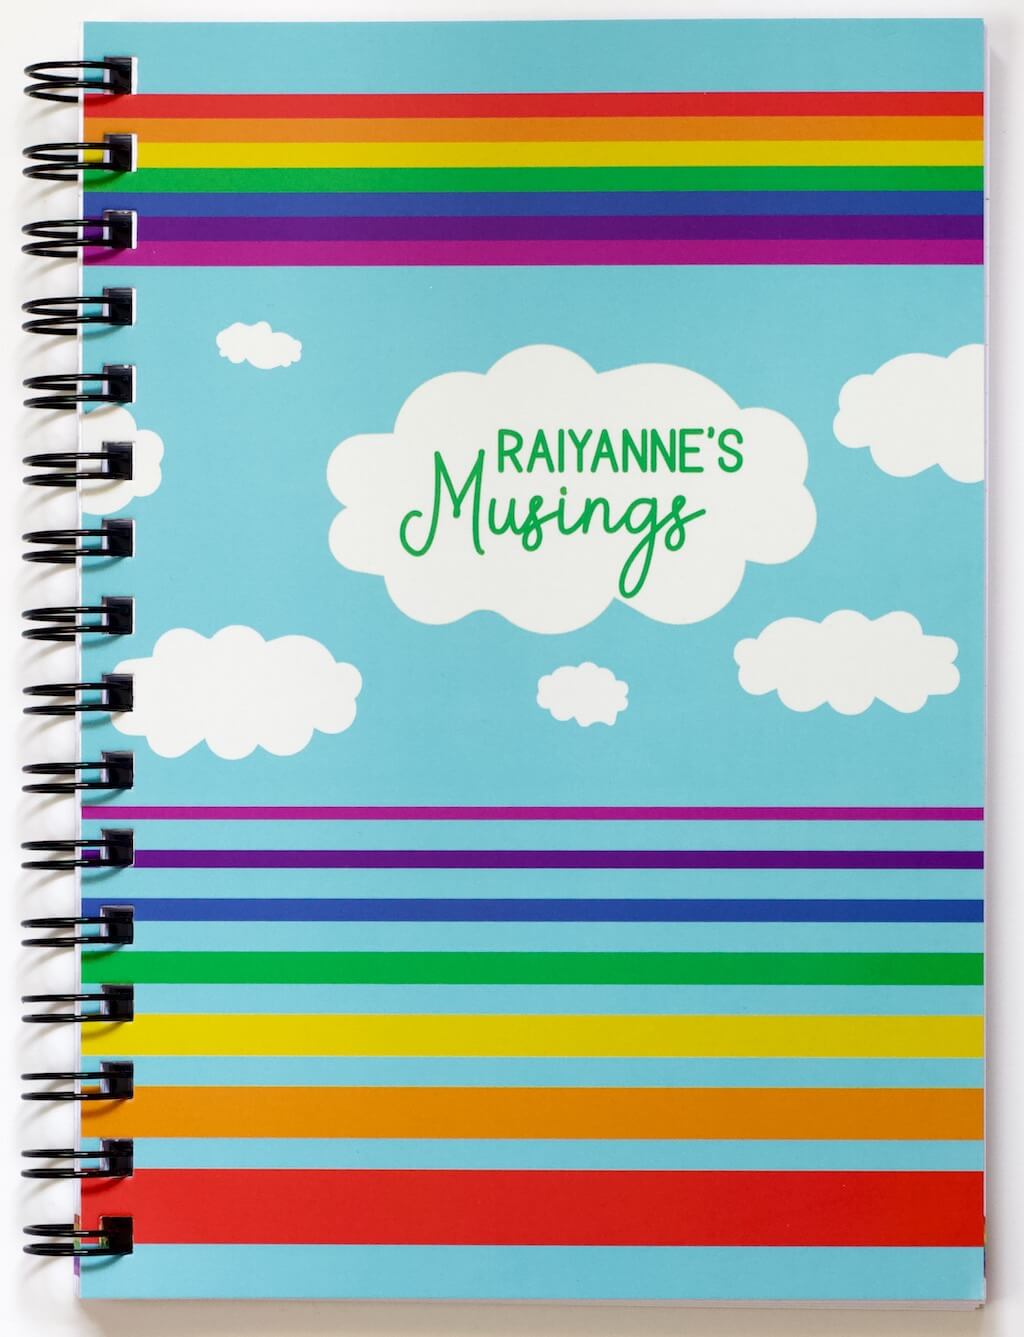 Cover of Haluna Happy Names &#39;In the Sky&#39; spiral-bound personalised A5 notebook in &#39;Day&#39;, showing from top to bottom a band of rainbow stripes, a flotilla of fluffy clouds, the biggest of which bears the notebook&#39;s title &quot;Raiyanne&#39;s Musings&quot;, and then separated set of rainbow stripes in inverse order, gradually getting wider from violet to red. The rainbows and clouds are against a daytime blue sky background.